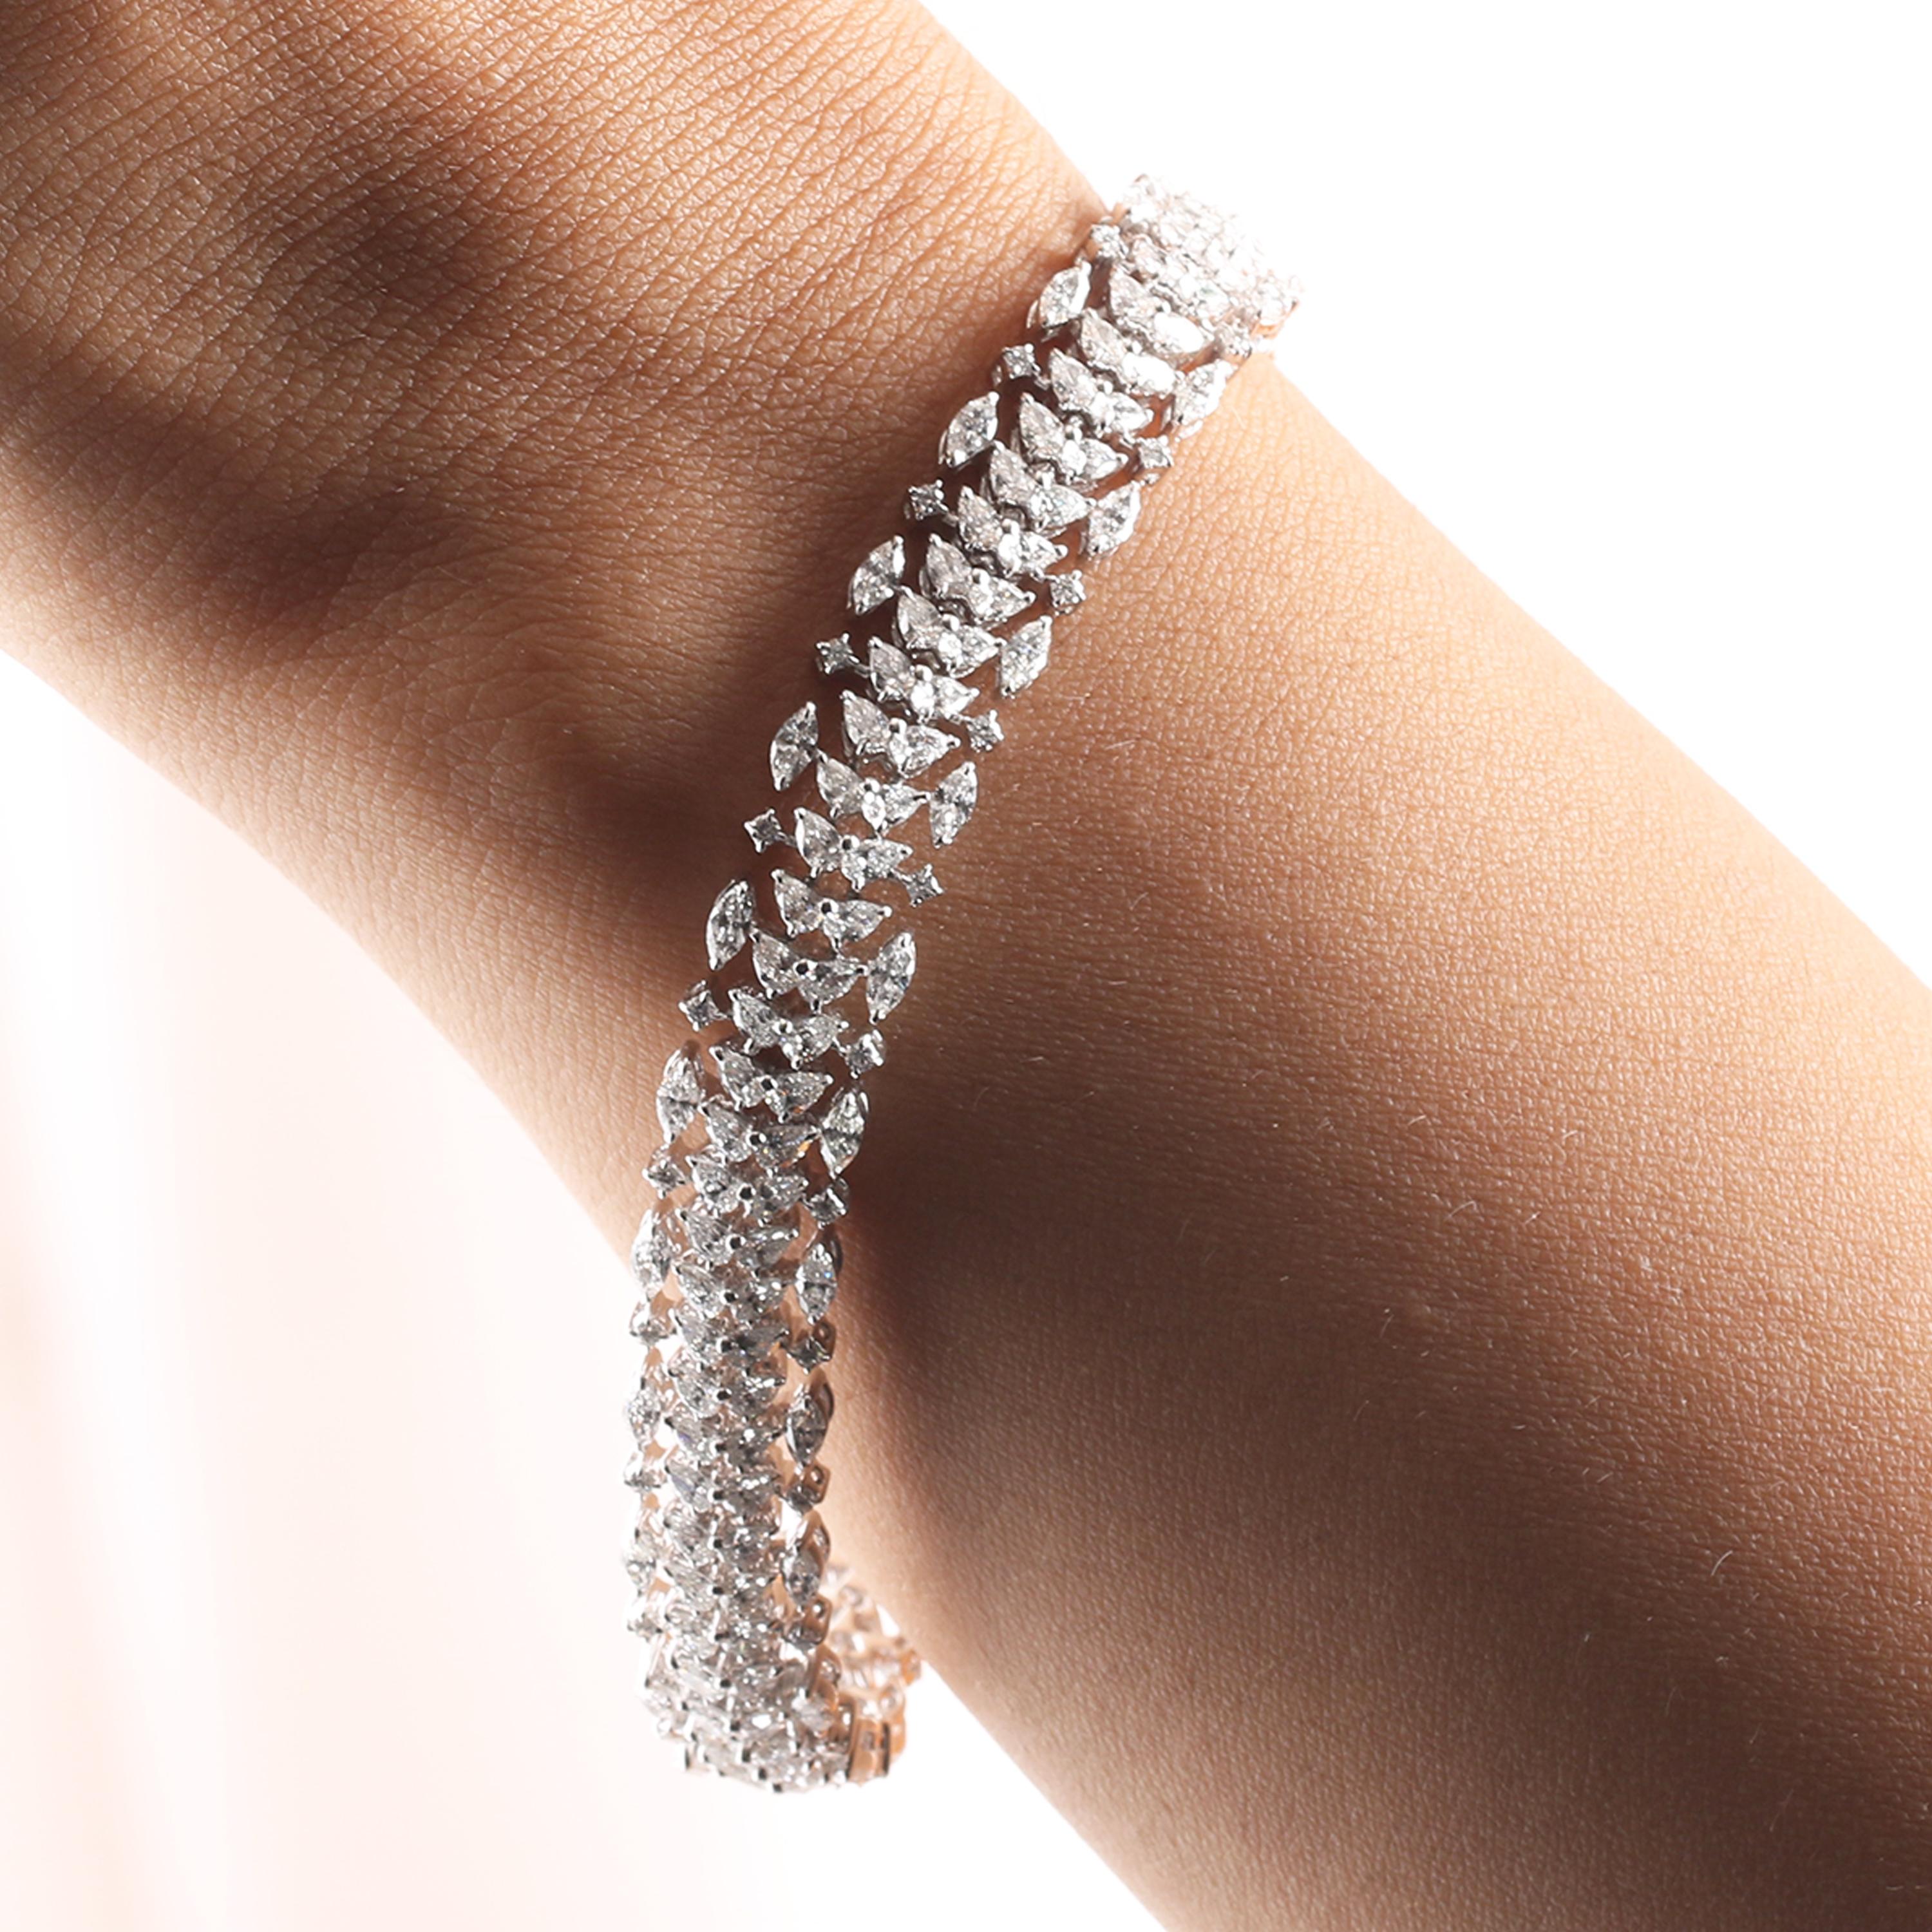 Gross Weight: 29.80 Grams
Diamond Weight: 7.48 cts
Size: 7 Inch (Length of Tennis Bracelet)
IGI Certification can be done on request.

Video of the product can be shared on request.

Featuring 7.48 carats of marquise, pear, and round brilliant cut